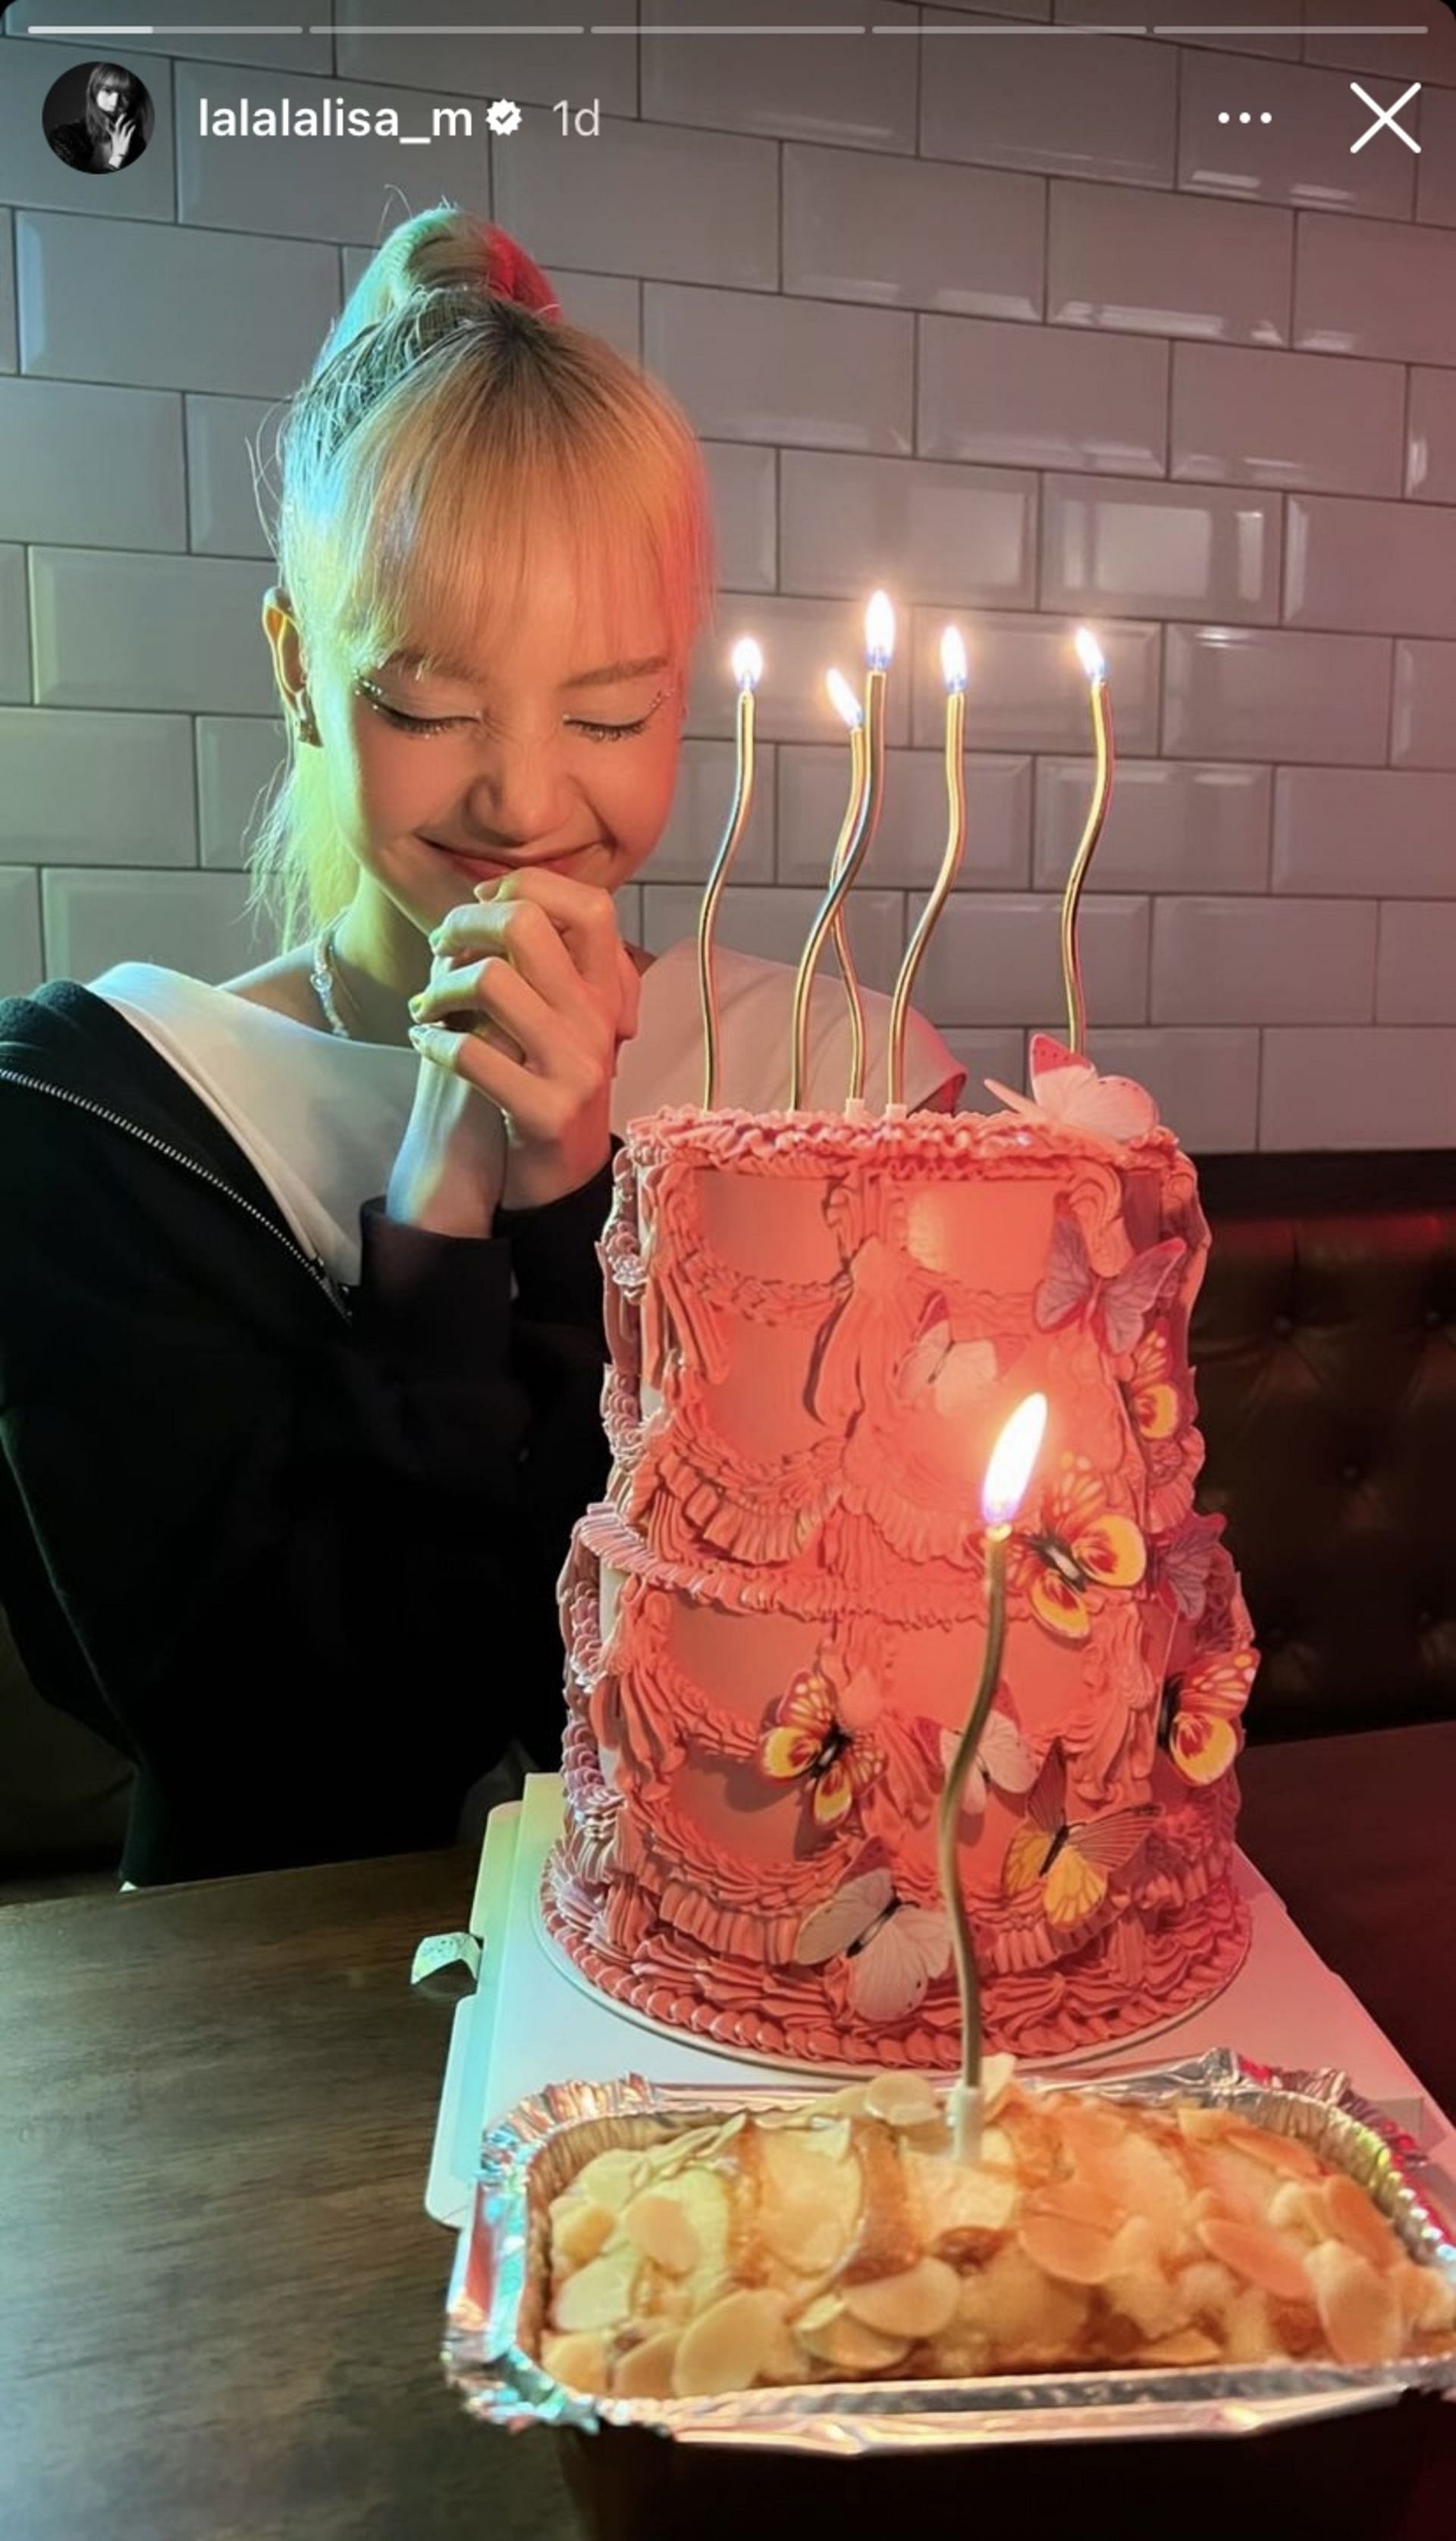 Lisa makes a wish before blowing out the candles (Image via lalalalisa_m/Instagram)